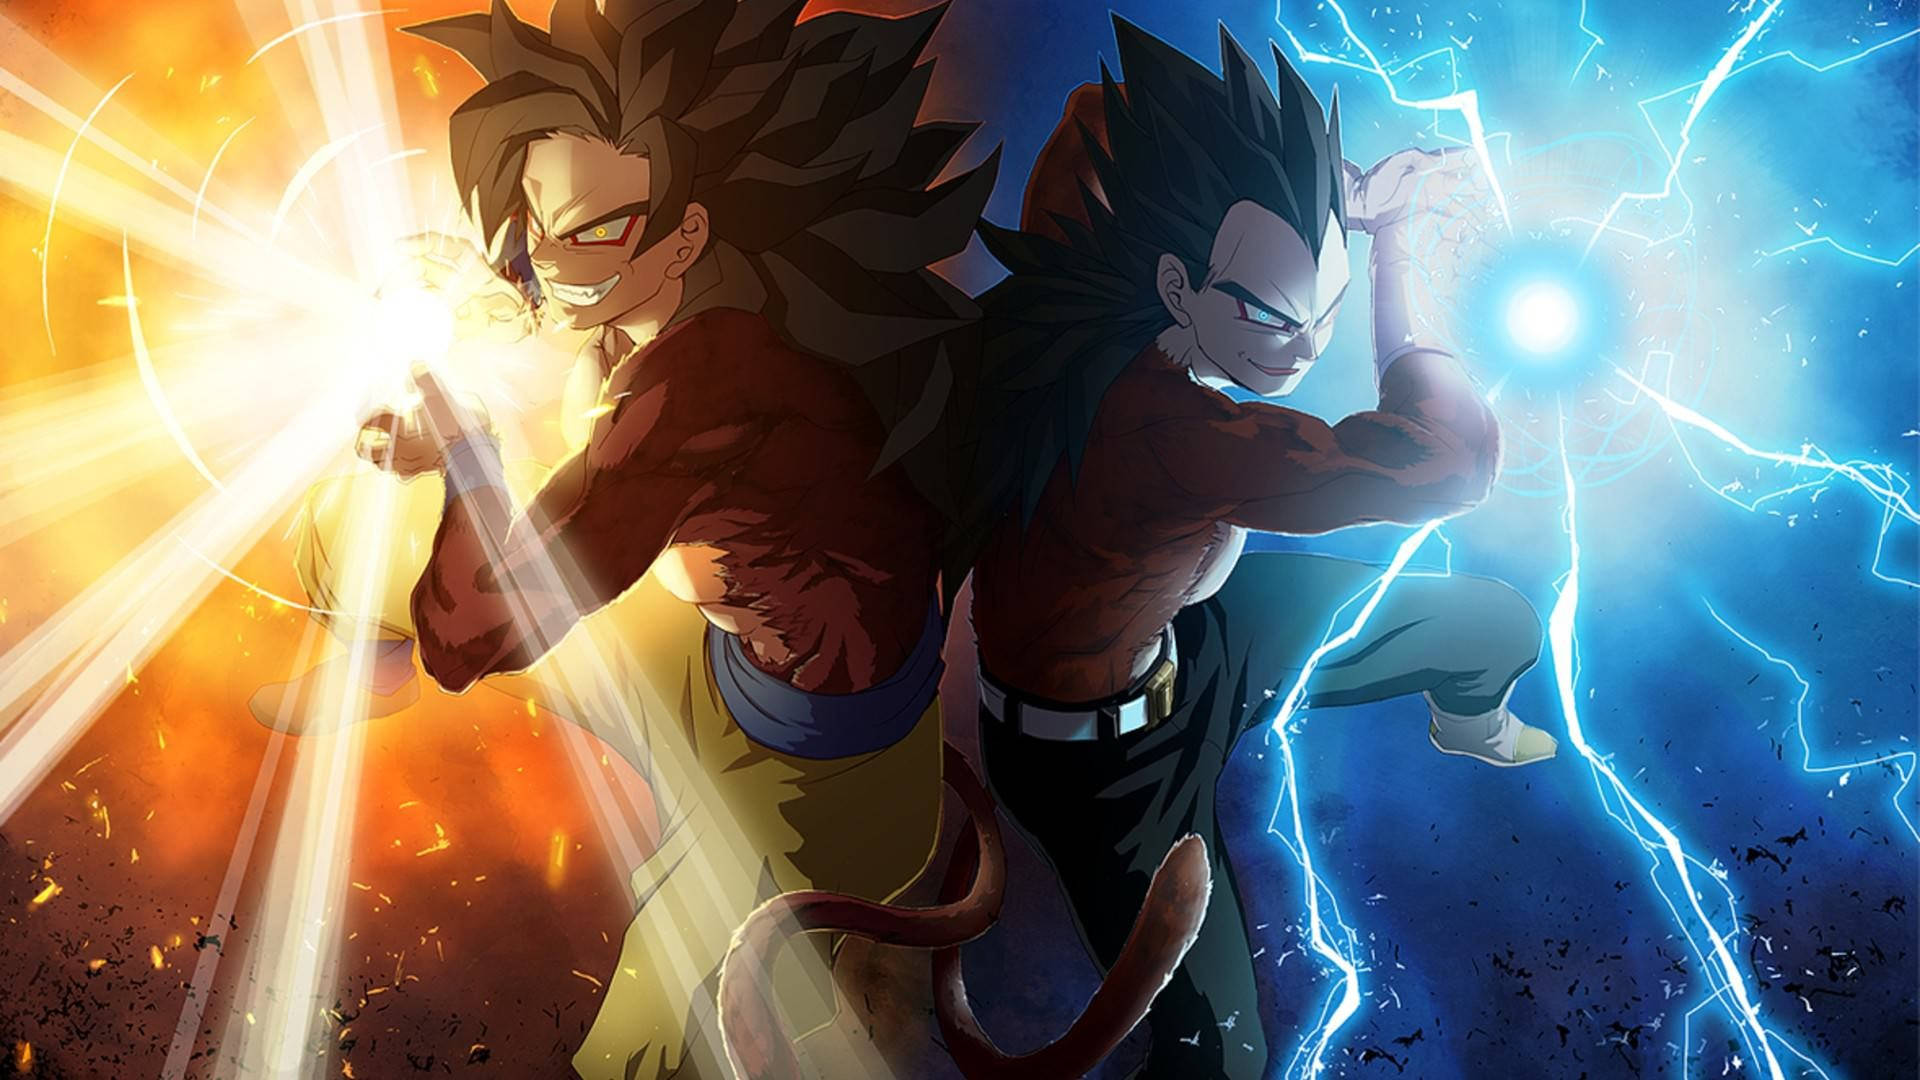 Free Anime Fight Wallpaper Downloads, [100+] Anime Fight Wallpapers for  FREE 